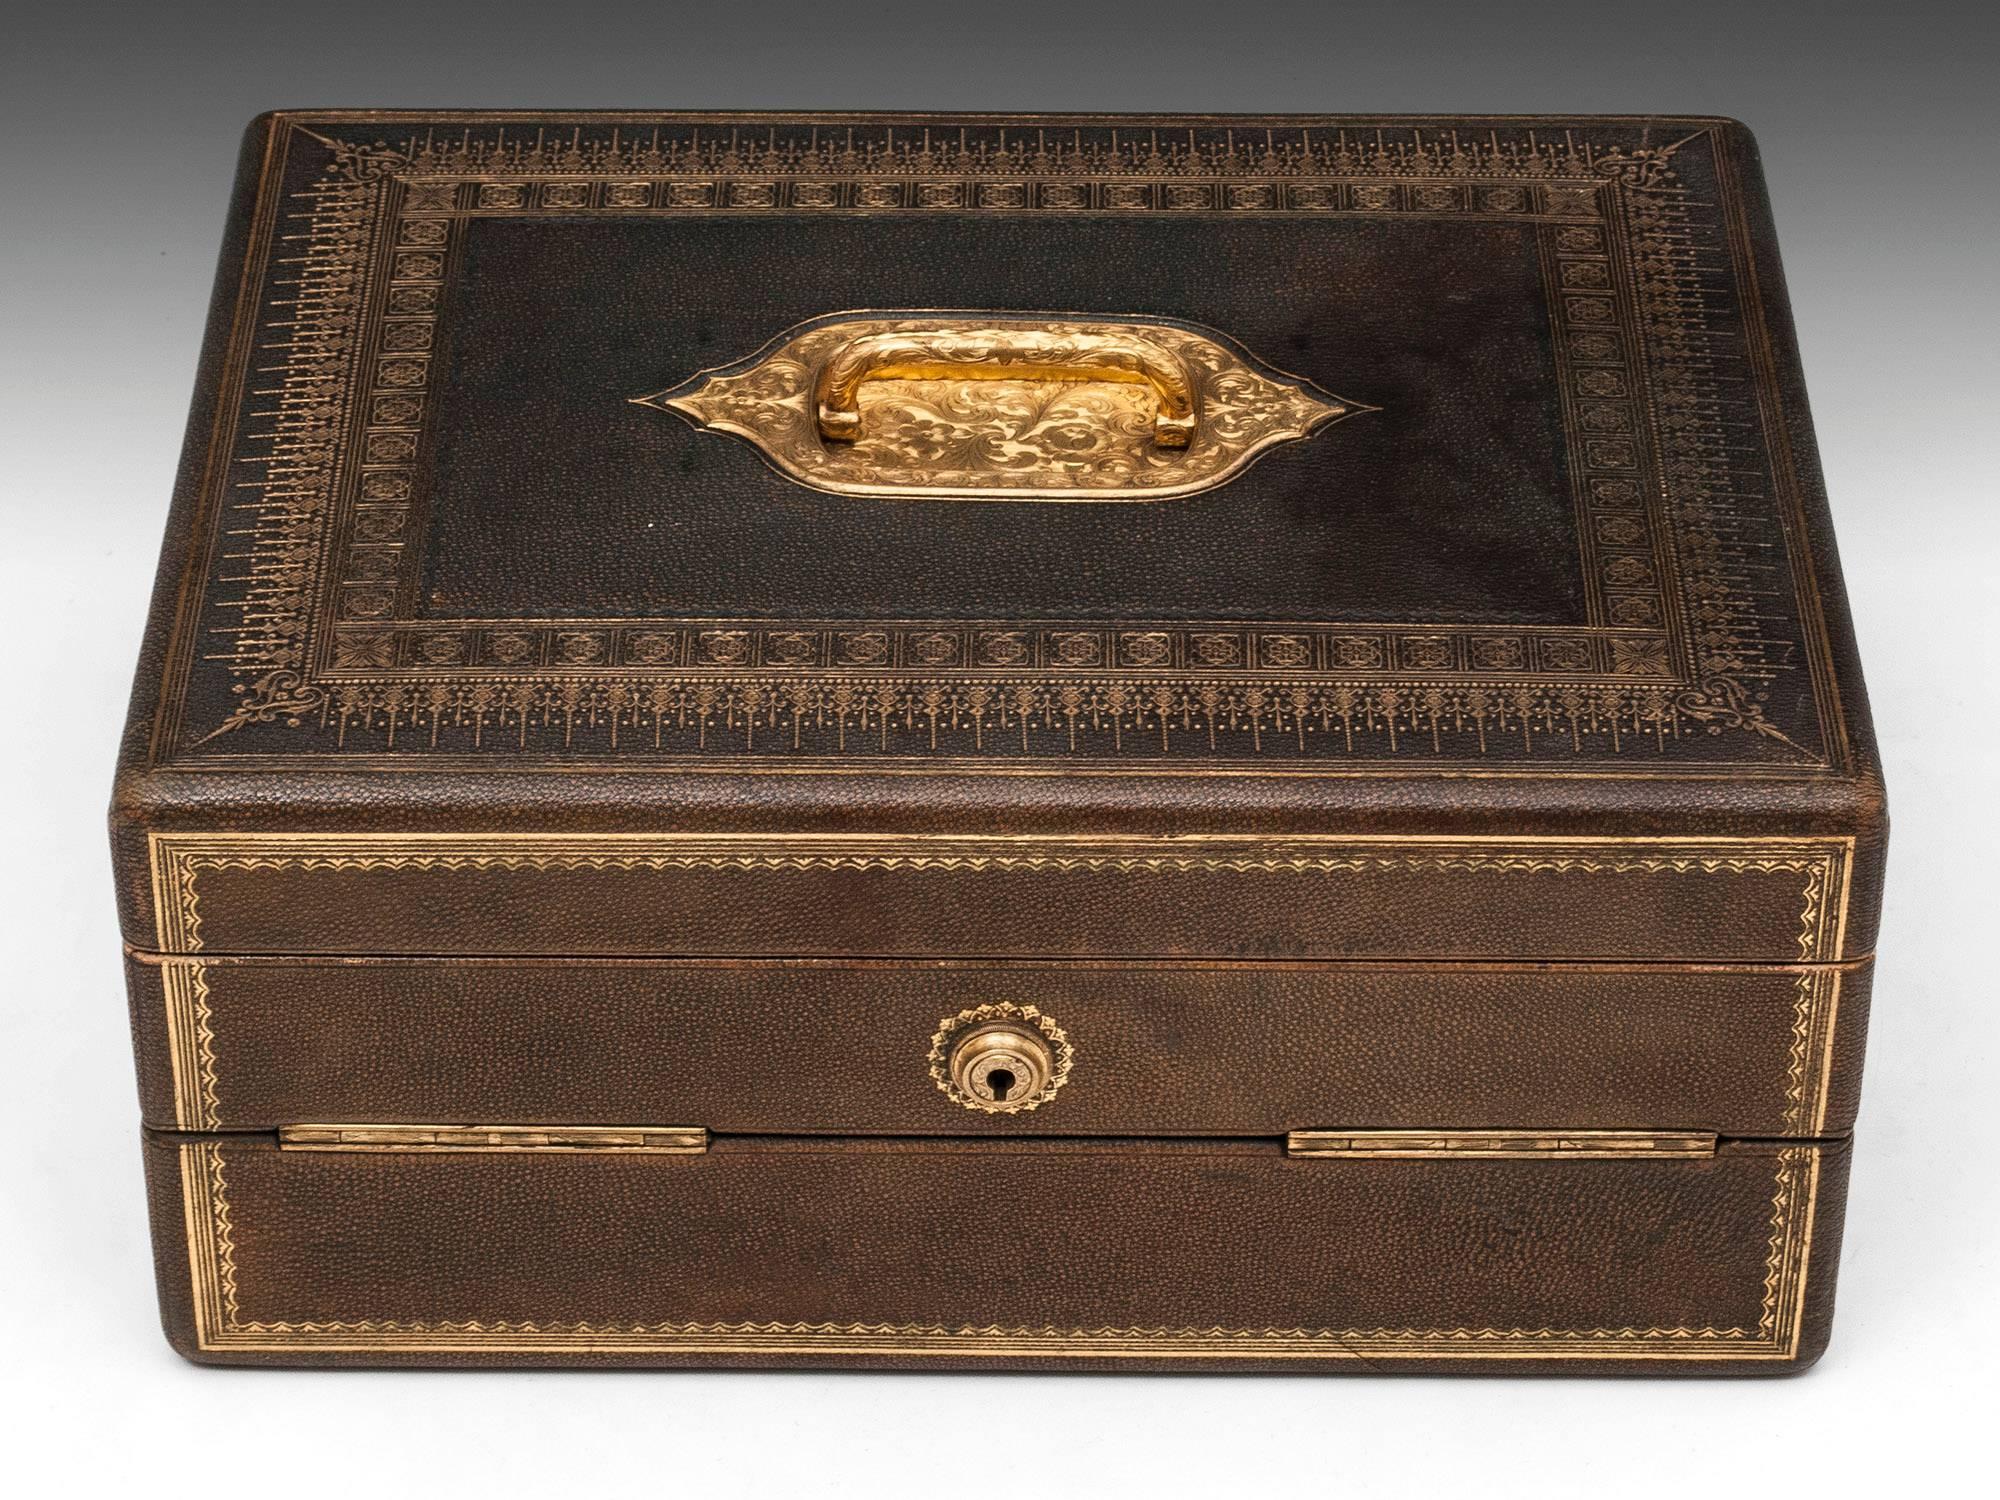 Leather bound writing box by W & J Milne, Edinburgh. 
The gorgeous mottled leather exterior is decorated with fine gold tooling and features ornate gilt brass carry handle and escutcheon. 

The interior features a vibrant blue velvet and leather